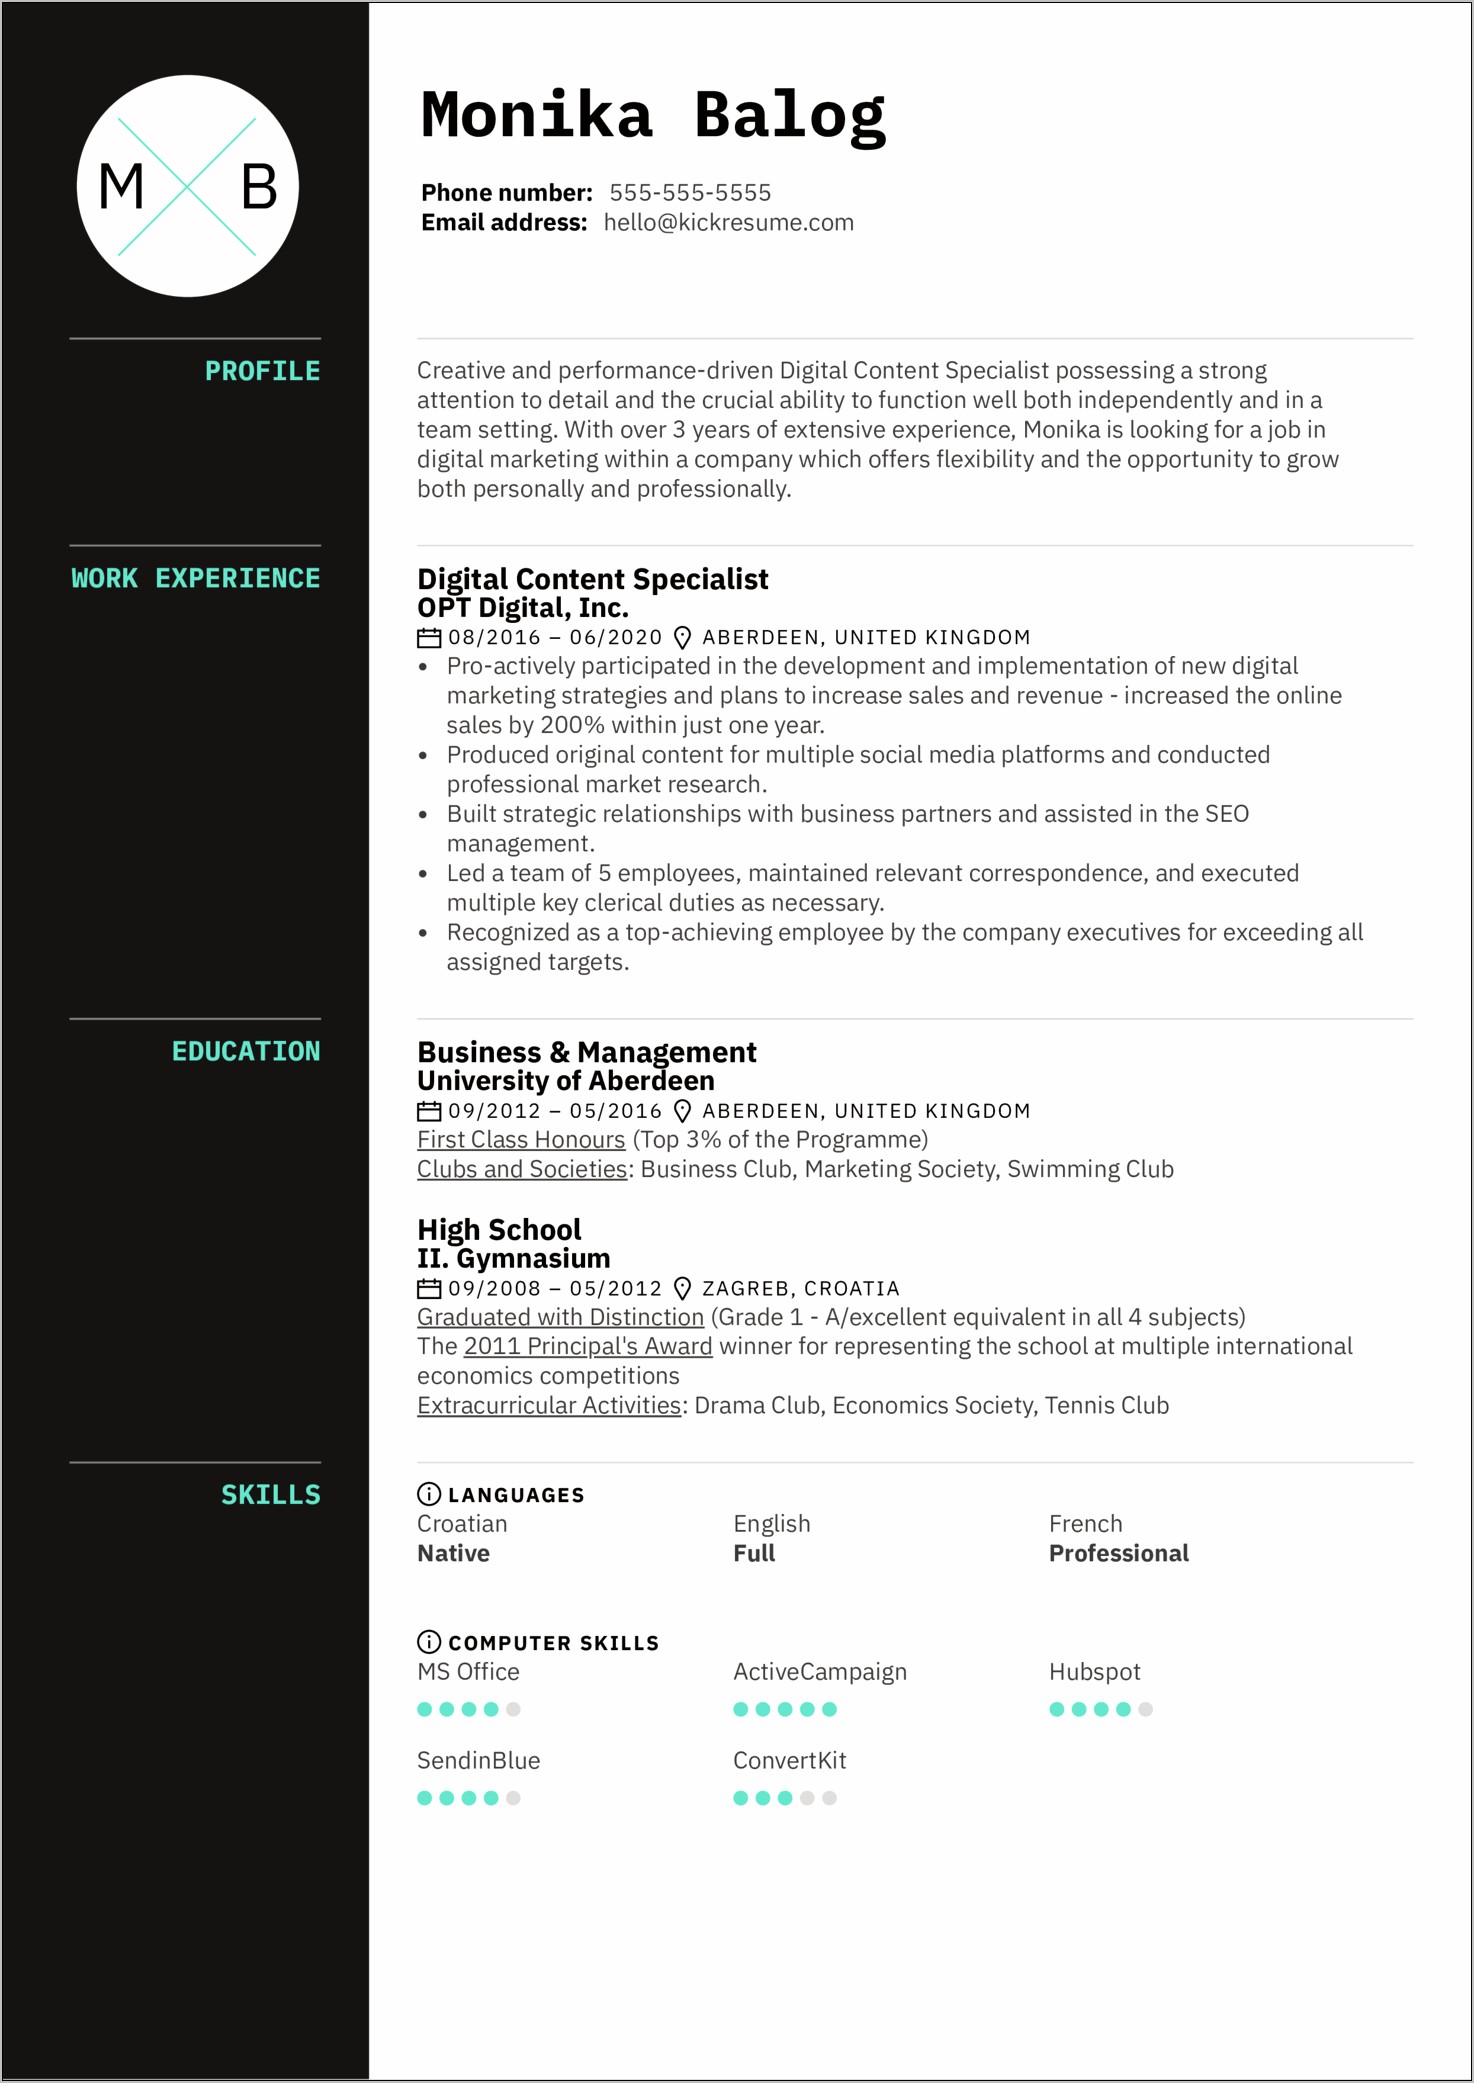 Copy And Paste Electronic Job Description In Resume